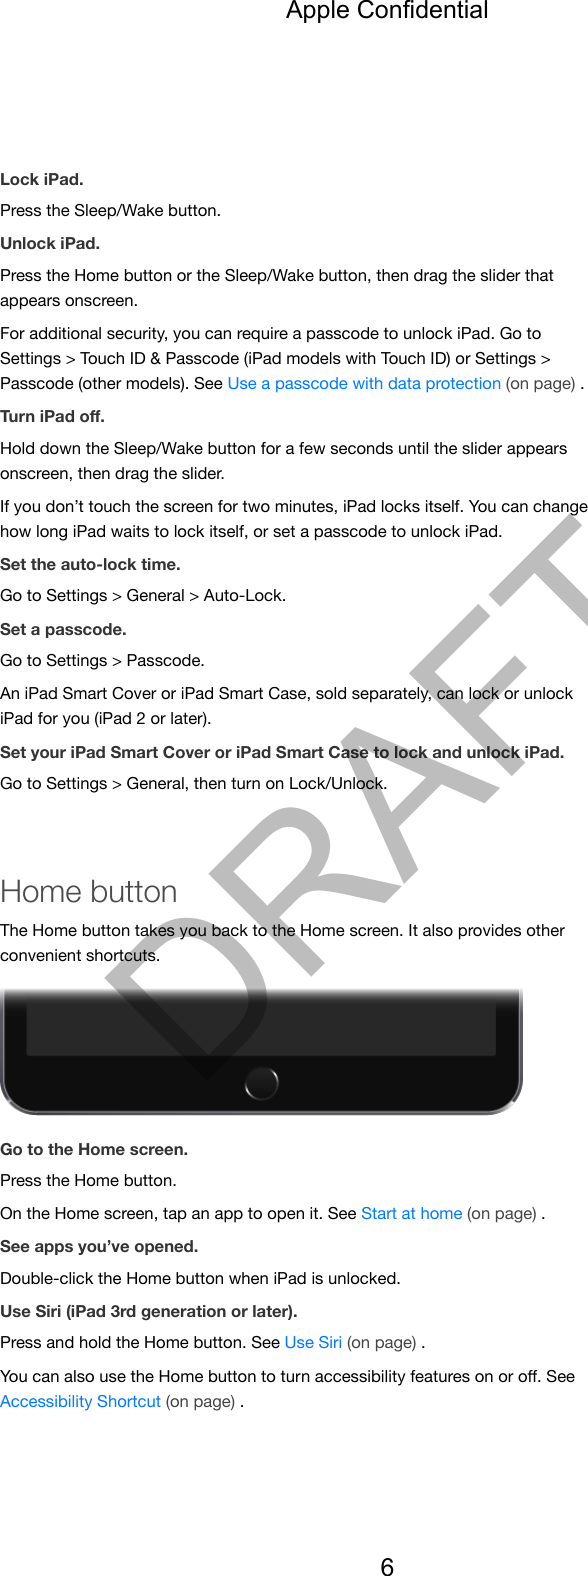 Lock iPad.Press the Sleep/Wake button.Unlock iPad.Press the Home button or the Sleep/Wake button, then drag the slider thatappears onscreen.For additional security, you can require a passcode to unlock iPad. Go toSettings &gt; Touch ID &amp; Passcode (iPad models with Touch ID) or Settings &gt;Passcode (other models). See Use a passcode with data protection (on page) .Turn iPad oﬀ.Hold down the Sleep/Wake button for a few seconds until the slider appearsonscreen, then drag the slider.If you don’t touch the screen for two minutes, iPad locks itself. You can changehow long iPad waits to lock itself, or set a passcode to unlock iPad.Set the auto-lock time.Go to Settings &gt; General &gt; Auto-Lock.Set a passcode.Go to Settings &gt; Passcode.An iPad Smart Cover or iPad Smart Case, sold separately, can lock or unlockiPad for you (iPad 2 or later).Set your iPad Smart Cover or iPad Smart Case to lock and unlock iPad.Go to Settings &gt; General, then turn on Lock/Unlock.Home buttonThe Home button takes you back to the Home screen. It also provides otherconvenient shortcuts.Go to the Home screen.Press the Home button.On the Home screen, tap an app to open it. See Start at home (on page) .See apps you’ve opened.Double-click the Home button when iPad is unlocked.Use Siri (iPad 3rd generation or later).Press and hold the Home button. See Use Siri (on page) .You can also use the Home button to turn accessibility features on or oﬀ. SeeAccessibility Shortcut (on page) .Apple Confidential6DRAFT